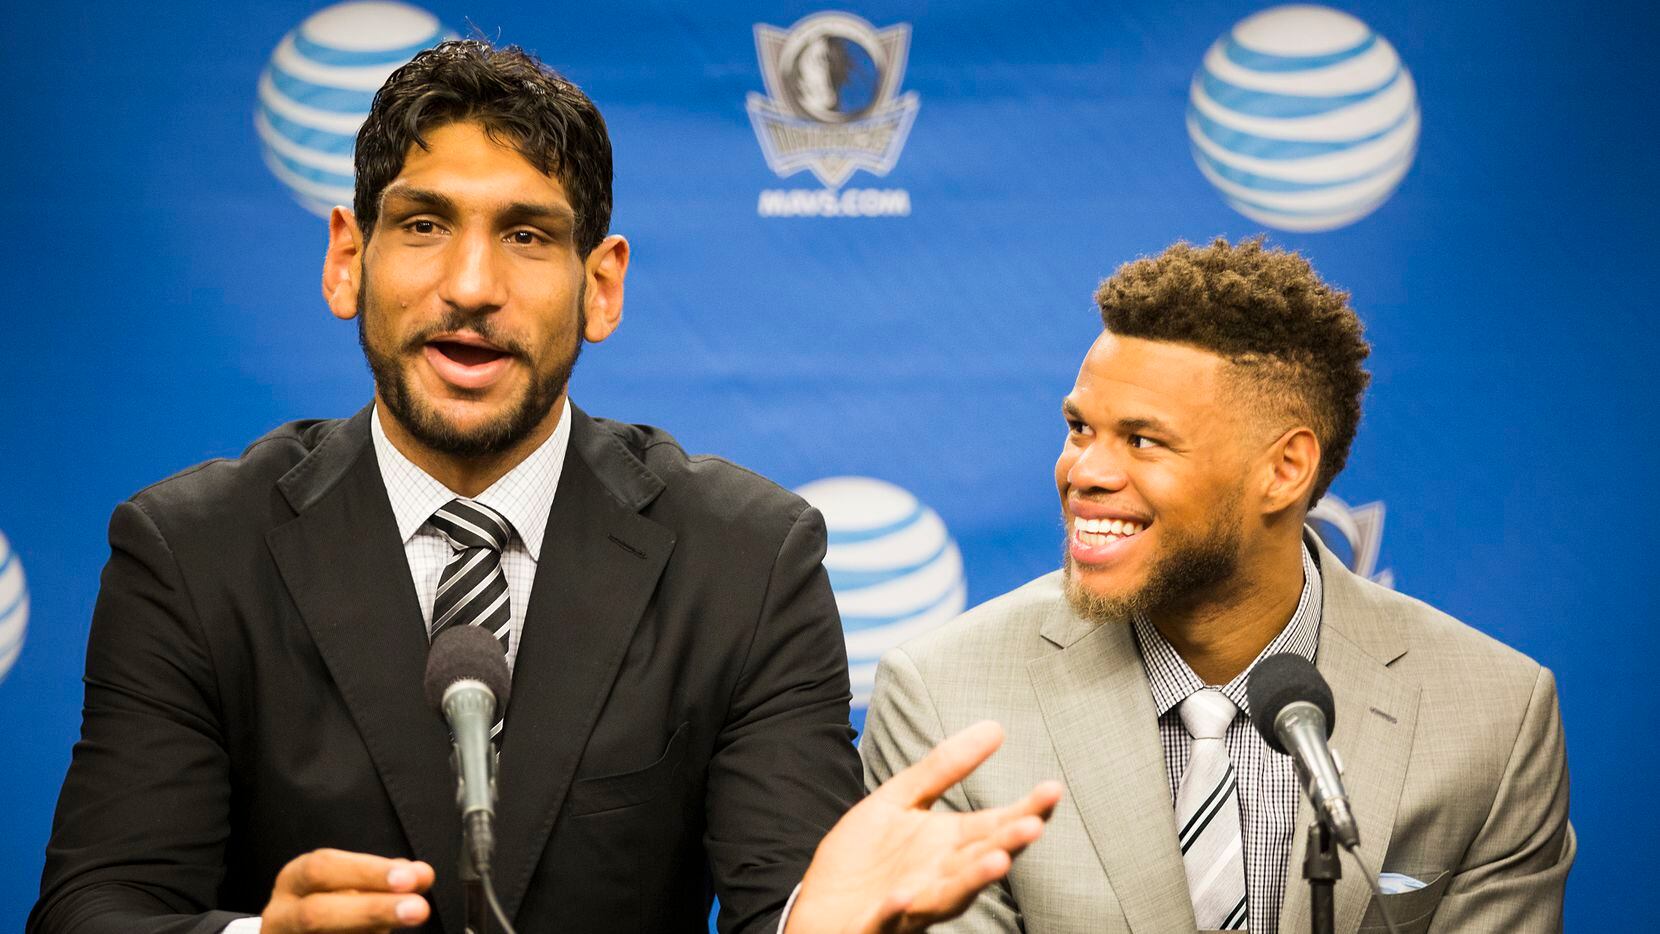 Dallas Mavericks draft pick Justin Anderson (right) listens as fellow pick Satnam Singh answers a question as the team introduces their 2015 draft picks during a press conference at American Airlines Center on Wednesday, July 8, 2015, in Dallas.